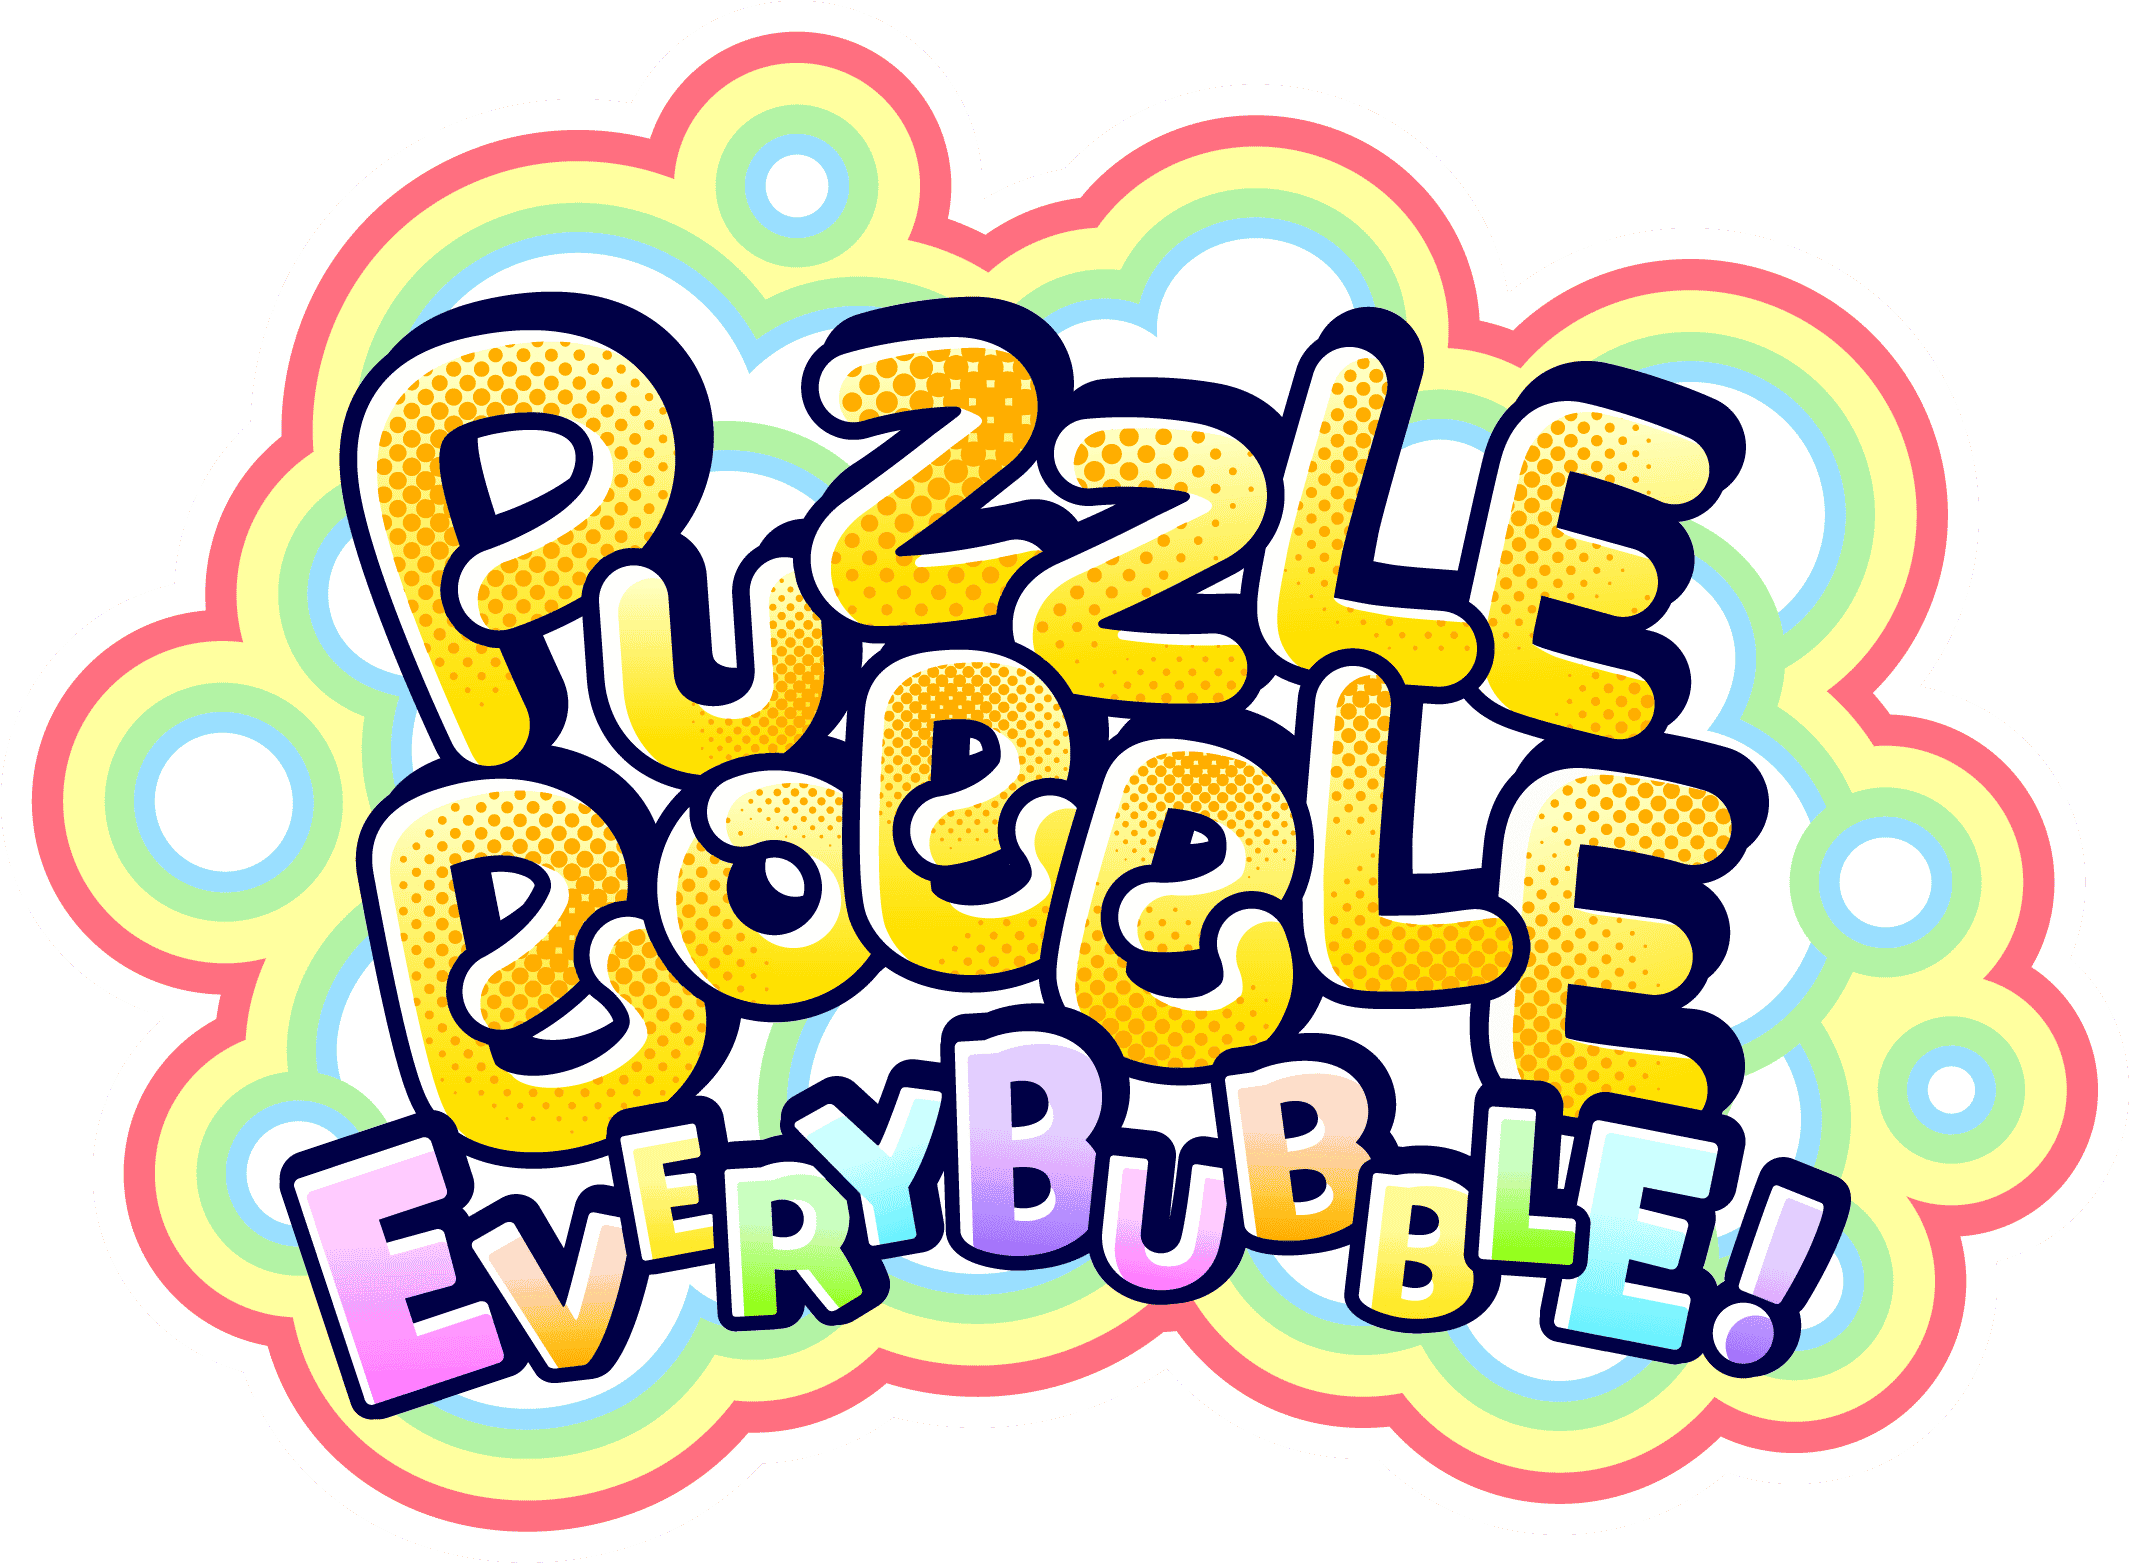 Puzzle Bobble Everybubble! player count stats